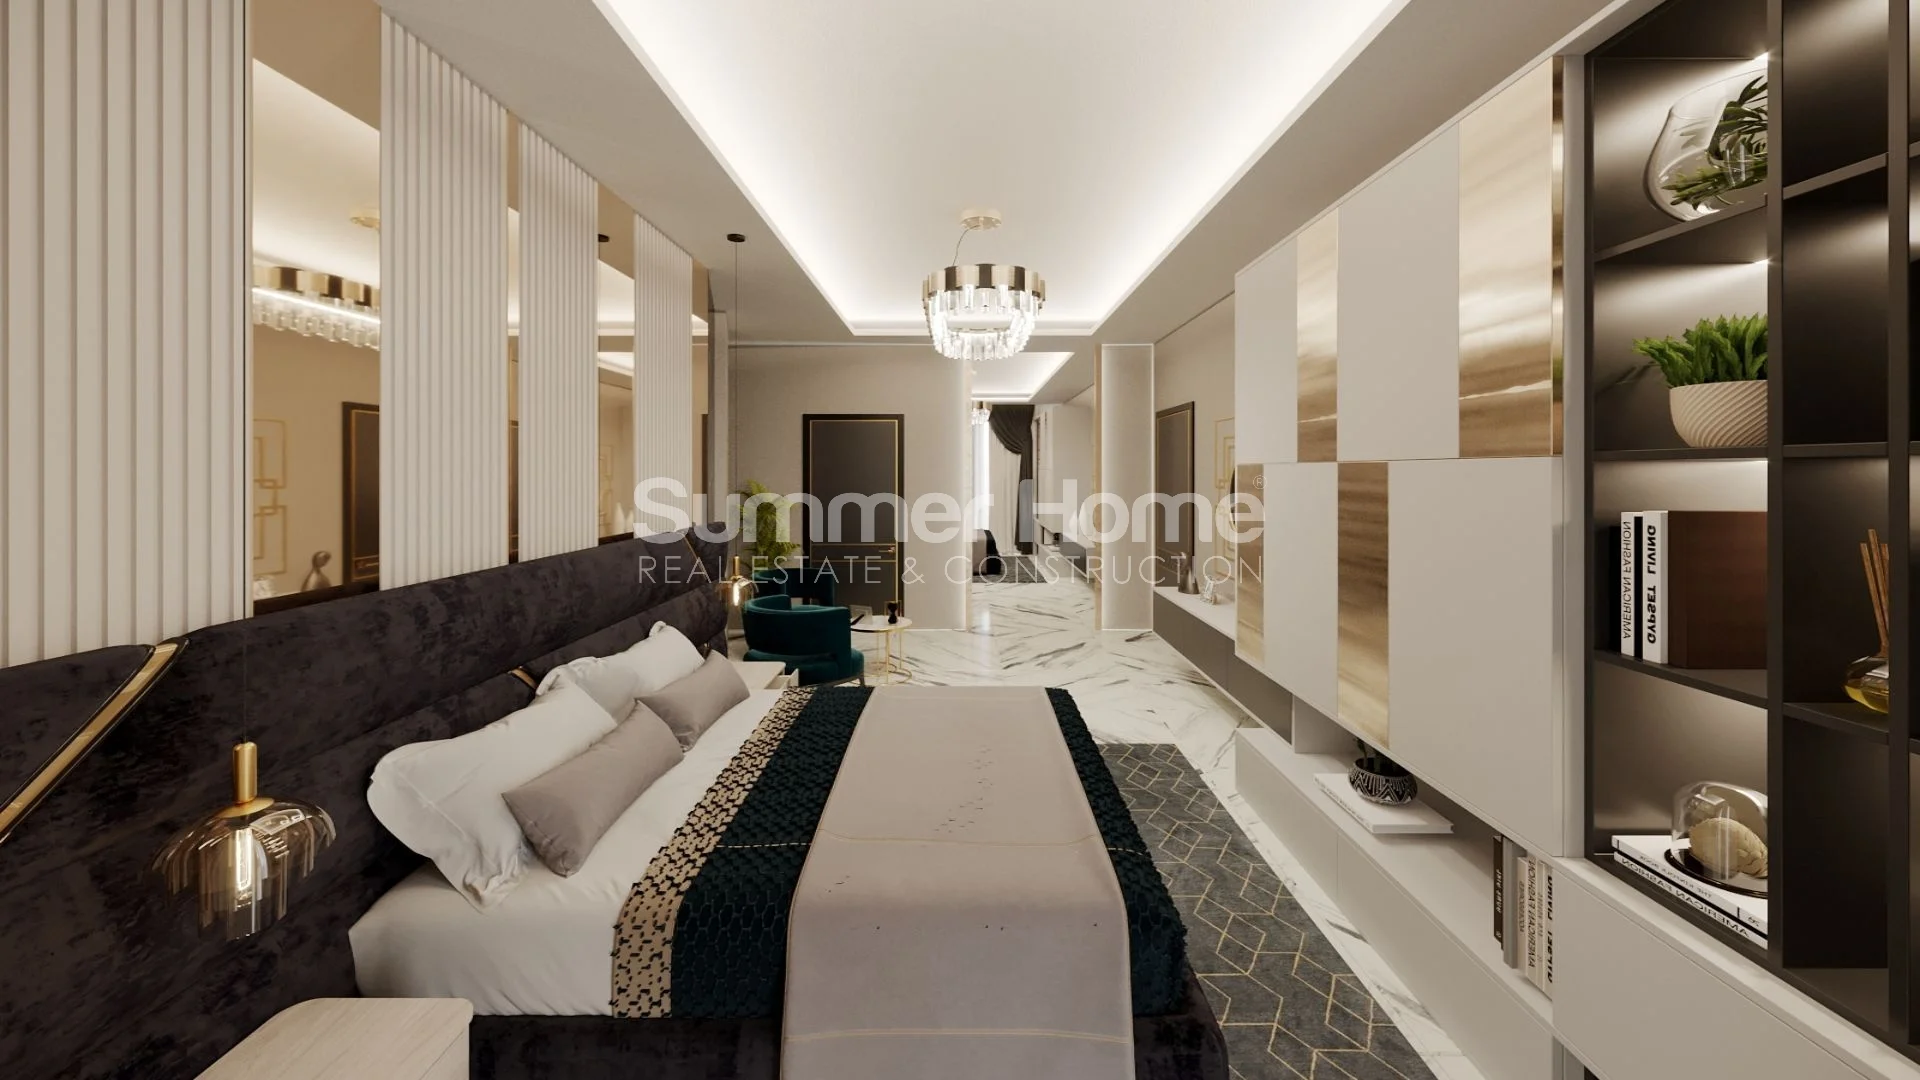 Luxurious 4 bedroomed villas in secluded area of Oba, Alanya Interior - 7